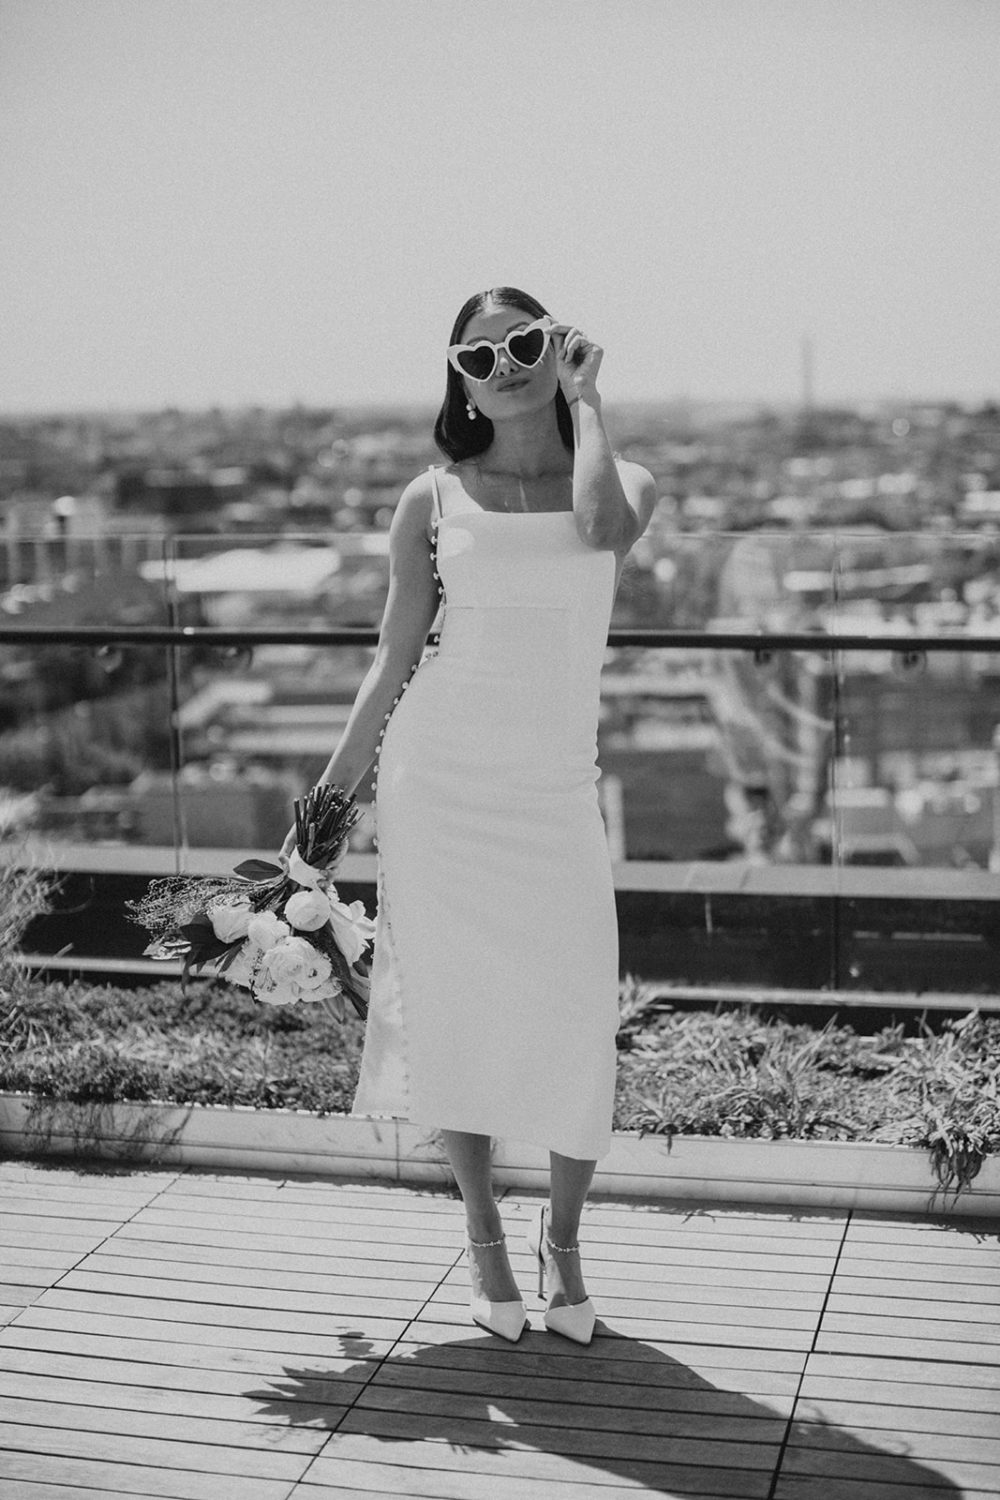 Bride holds wedding bouquet while wearing sunglasses on rooftop